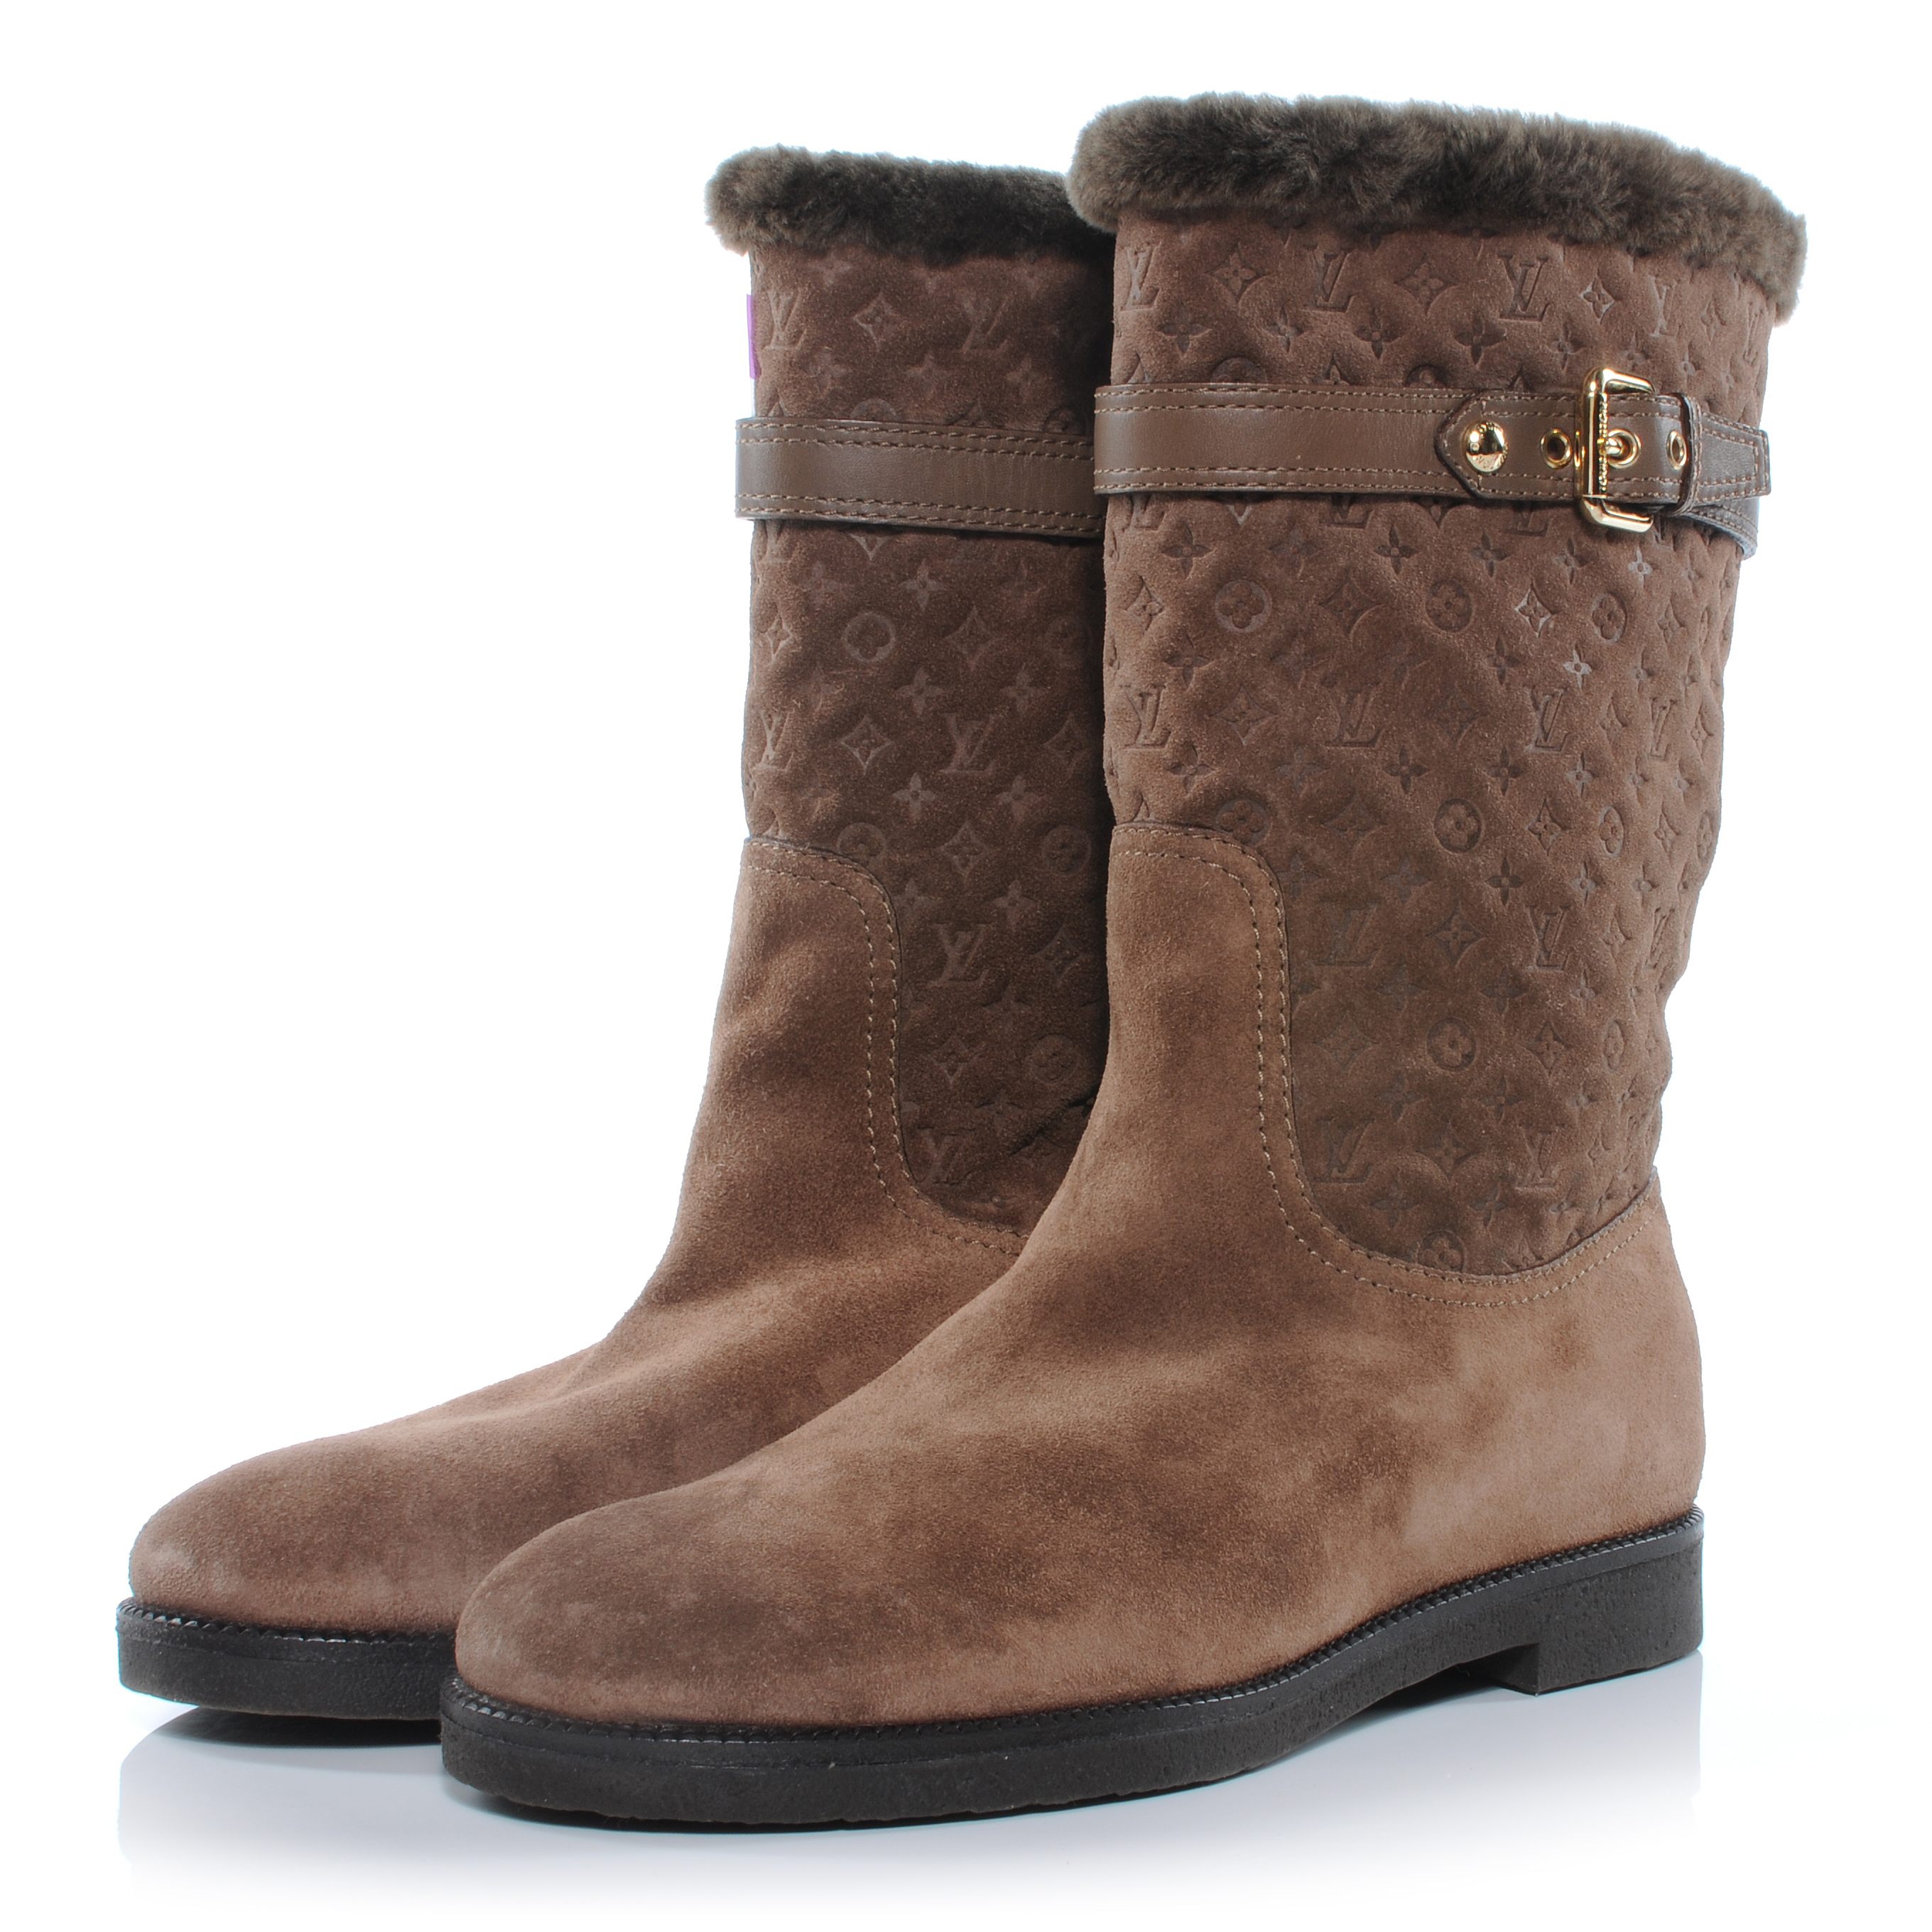 LOUIS VUITTON Suede Fur Wintry Boots 41 